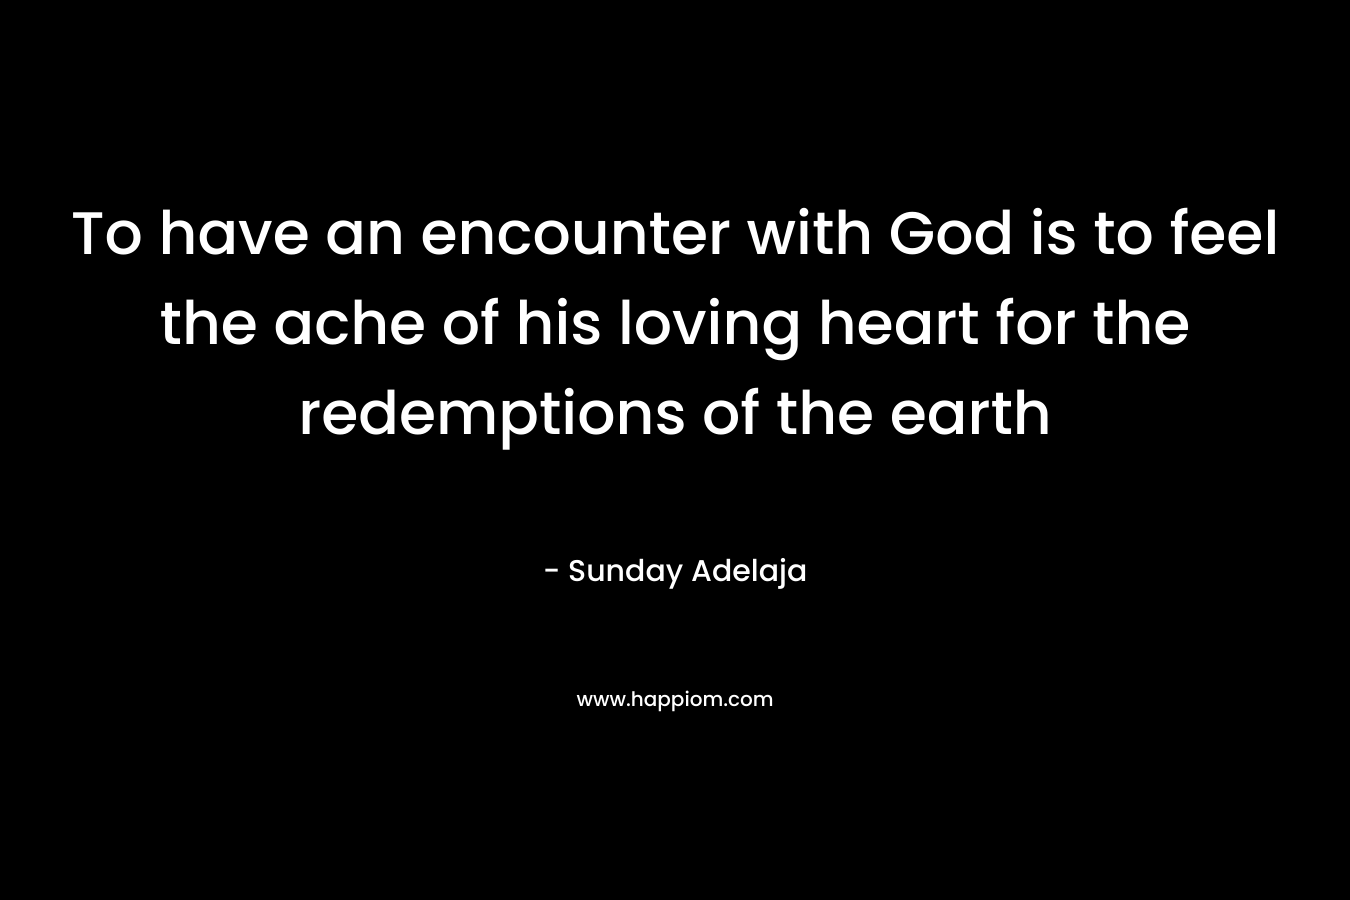 To have an encounter with God is to feel the ache of his loving heart for the redemptions of the earth